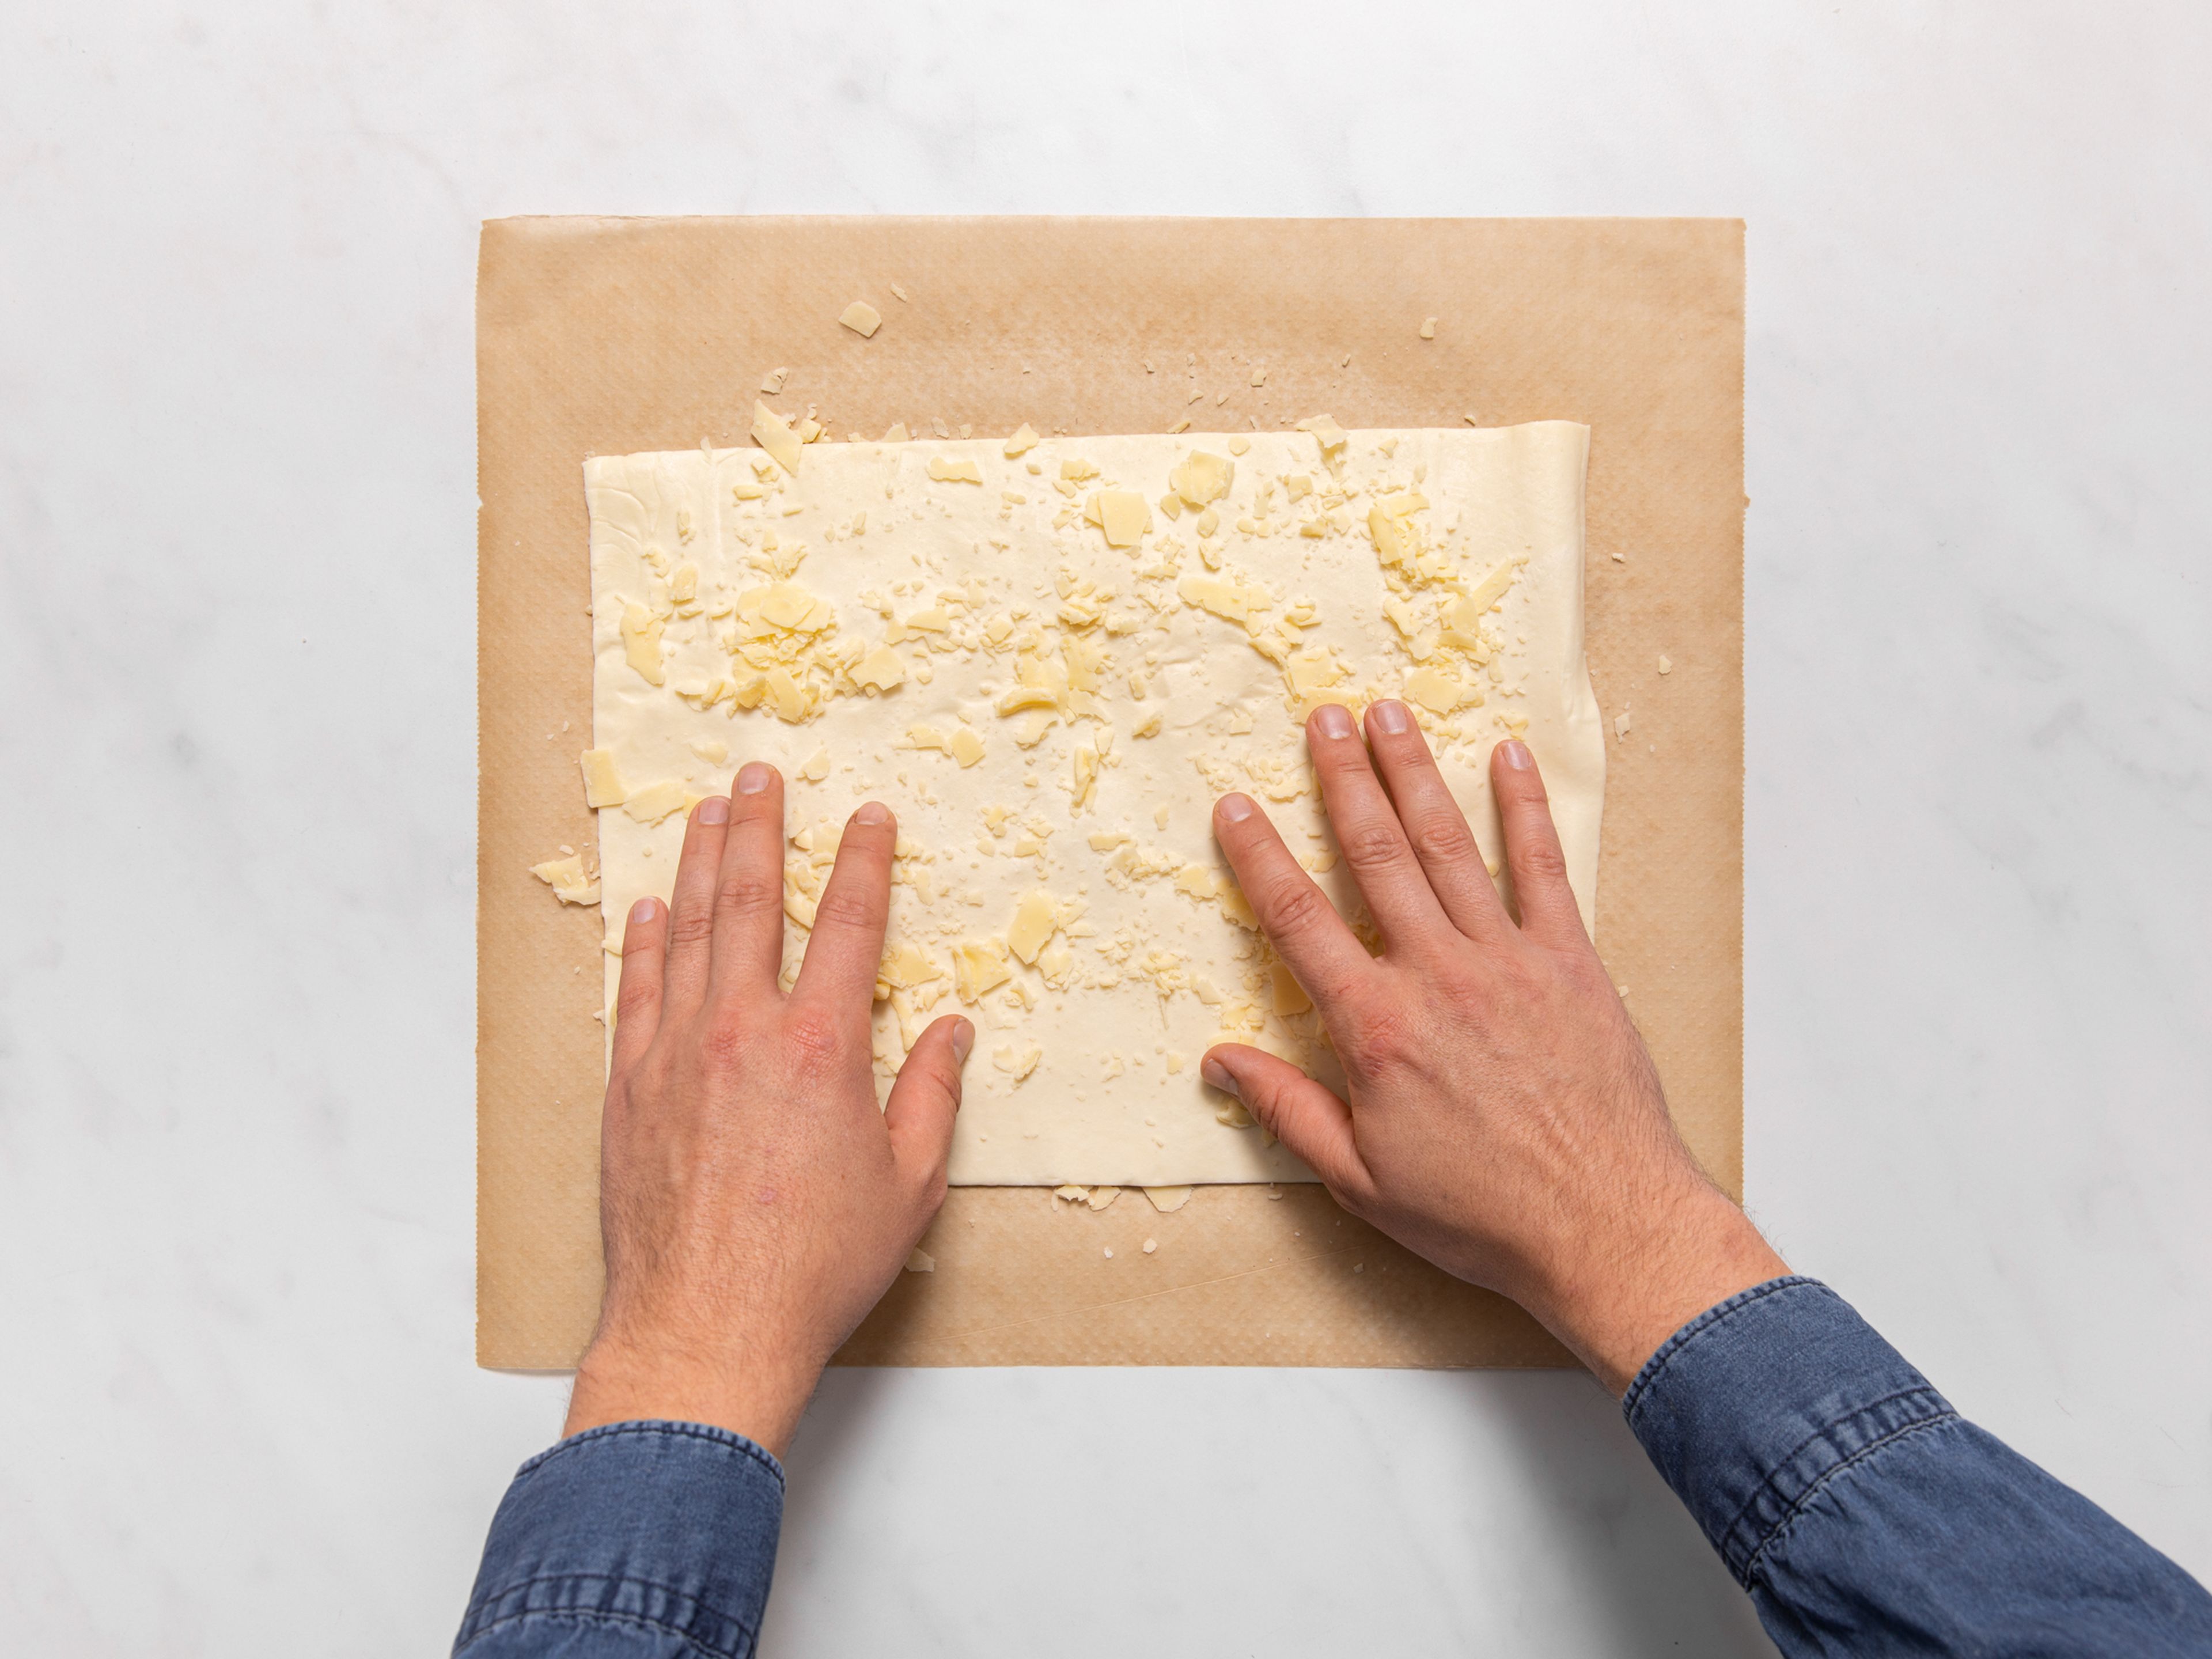 Sprinkle half the cheese onto a work surface and lay a sheet of puff pastry over the top. Sprinkle remaining cheese over the puff pastry. Add a pinch of cayenne pepper over the whole sheet, then roll the pastry into a small log.